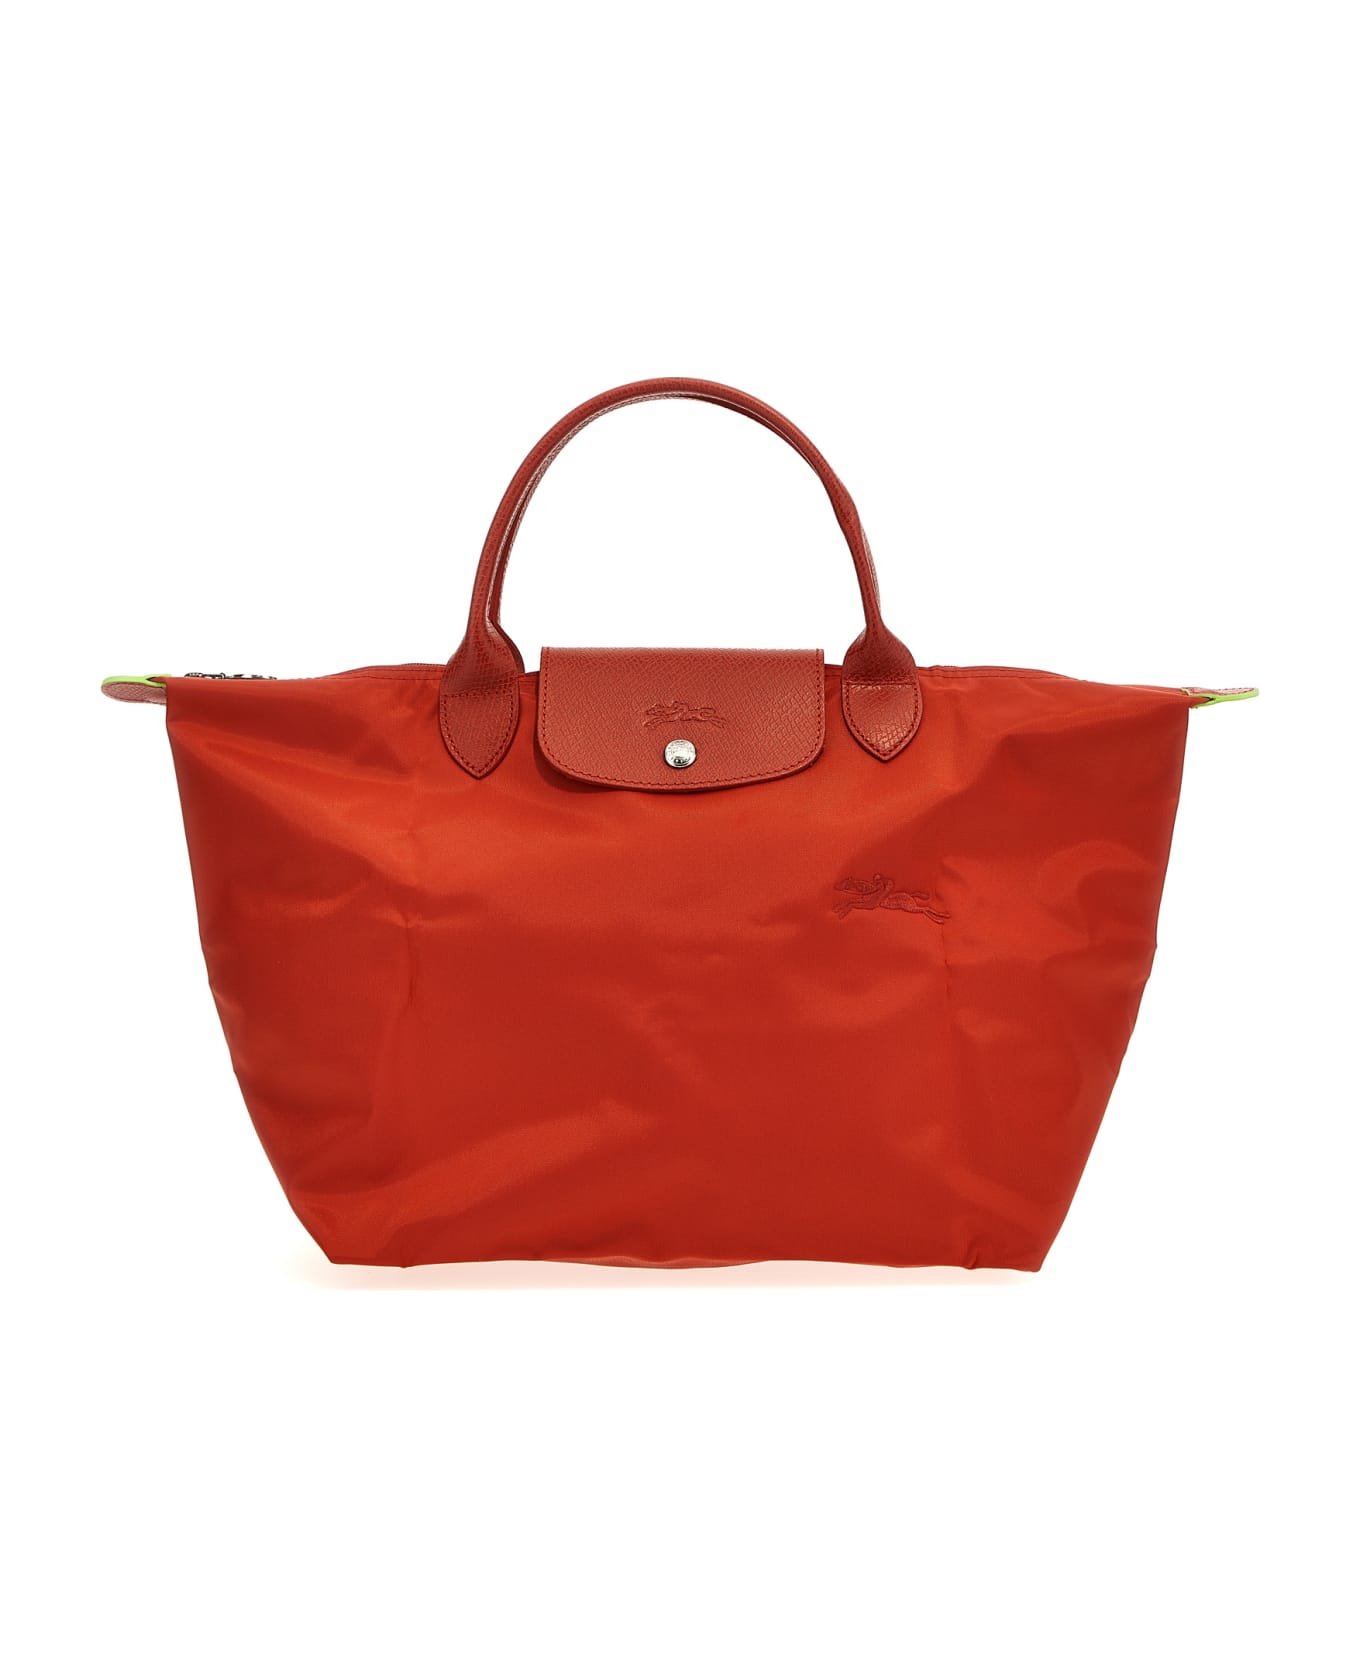 Longchamp Le Pliage Green M - Red トートバッグ